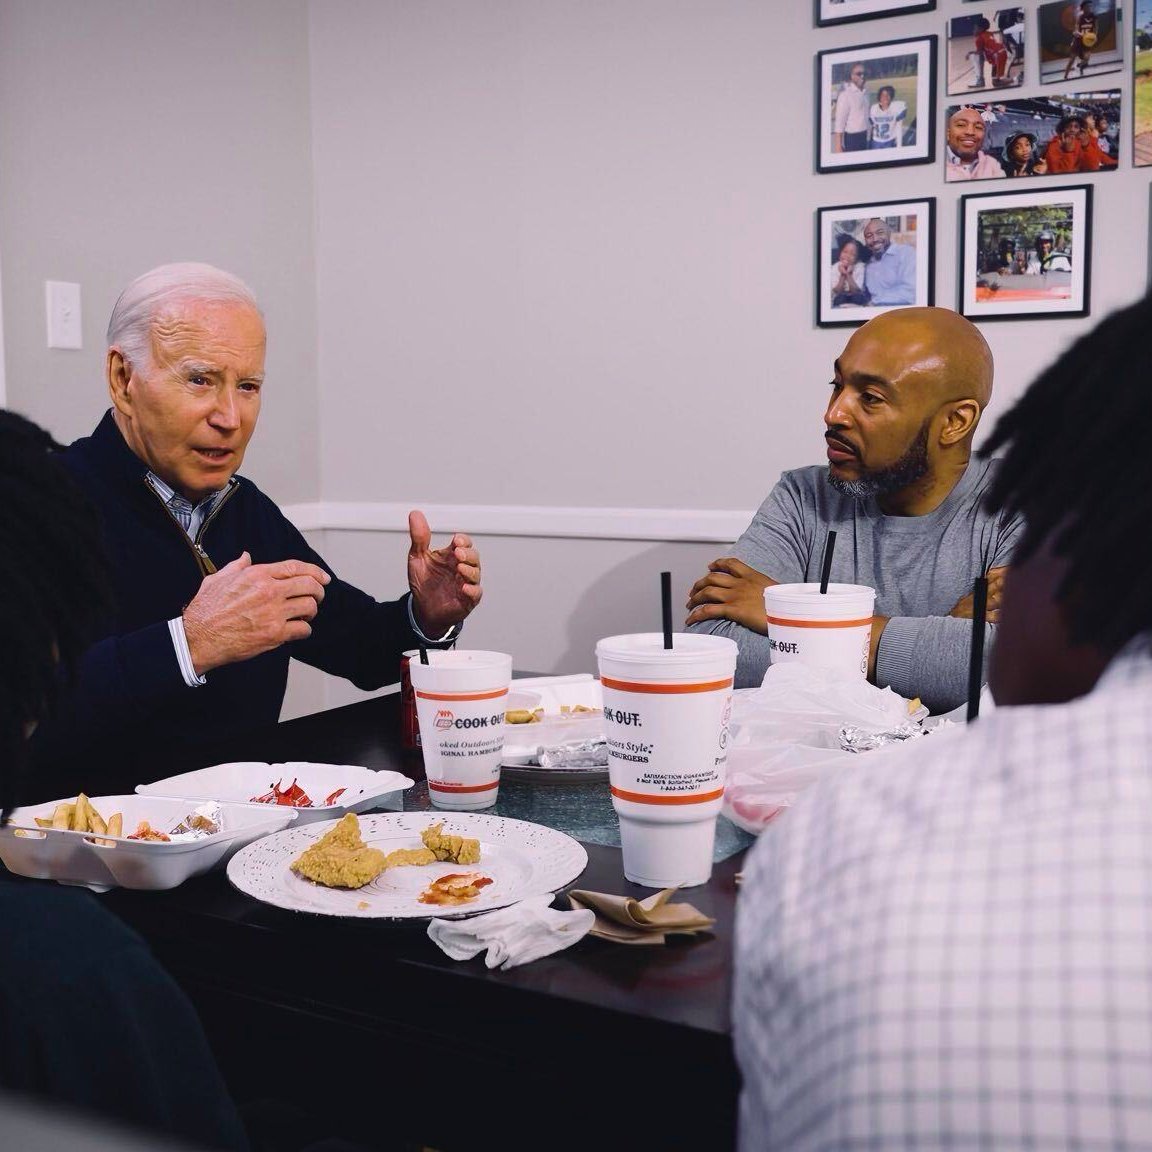 Yesterday in North Carolina, I stopped by Eric’s house to have lunch with him and his two sons. I brought some Cook Out. They were an impressive family—Eric’s an award-winning educator and his sons are both athletic and academic all stars. We talked about the importance of